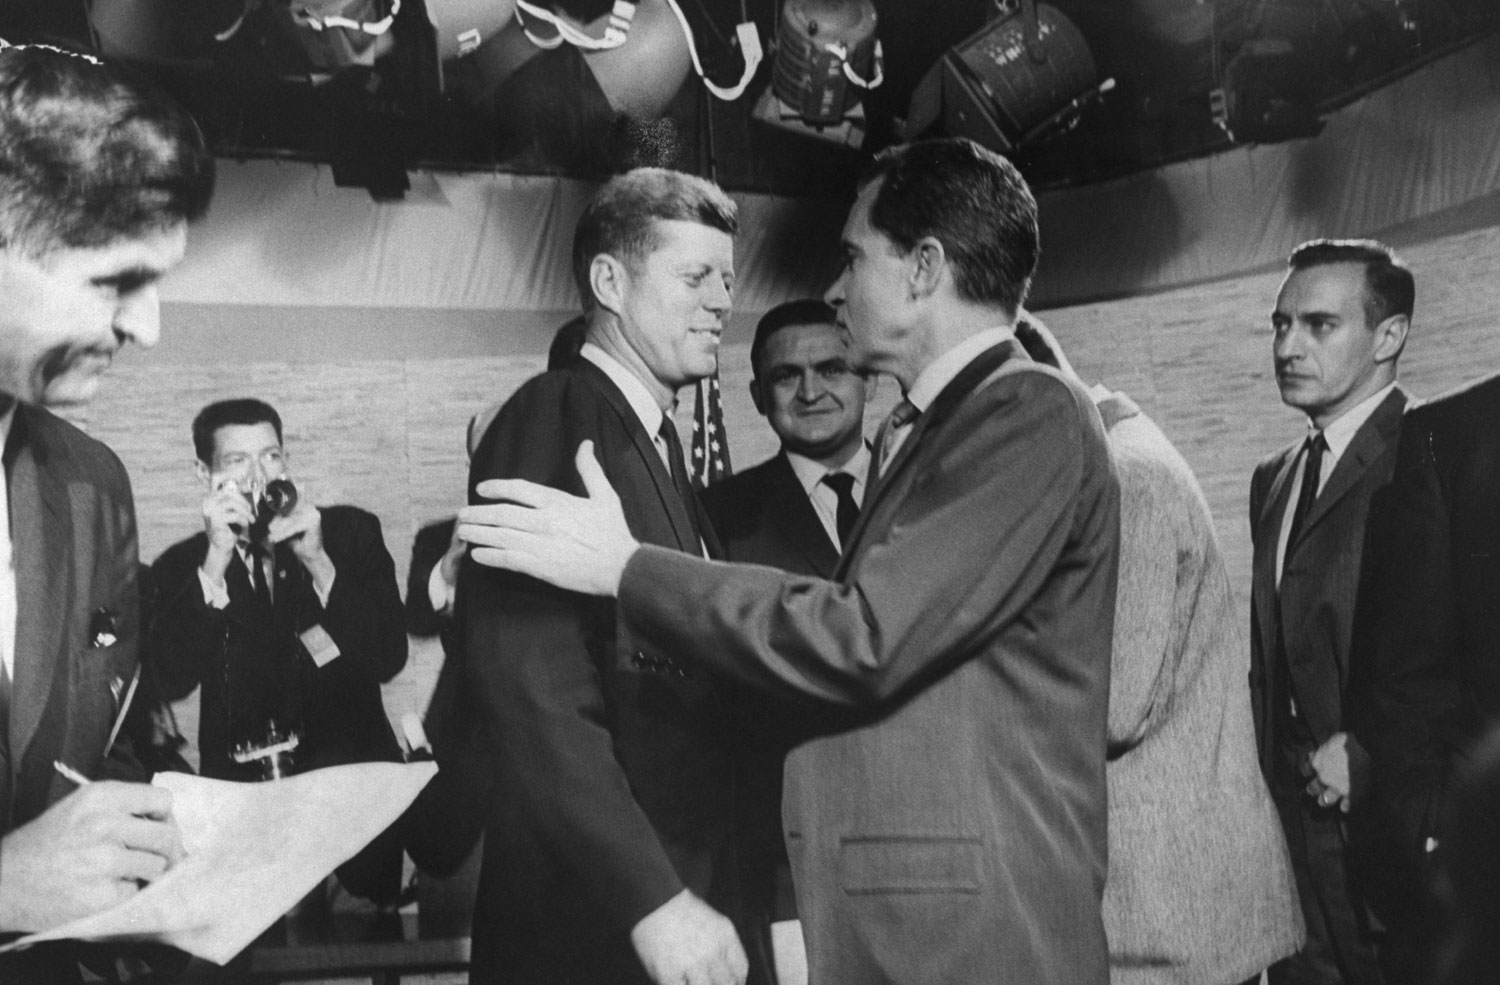 Presidential candidates John F. Kennedy and Richard M. Nixon at the time of their famous television debates, 1960.